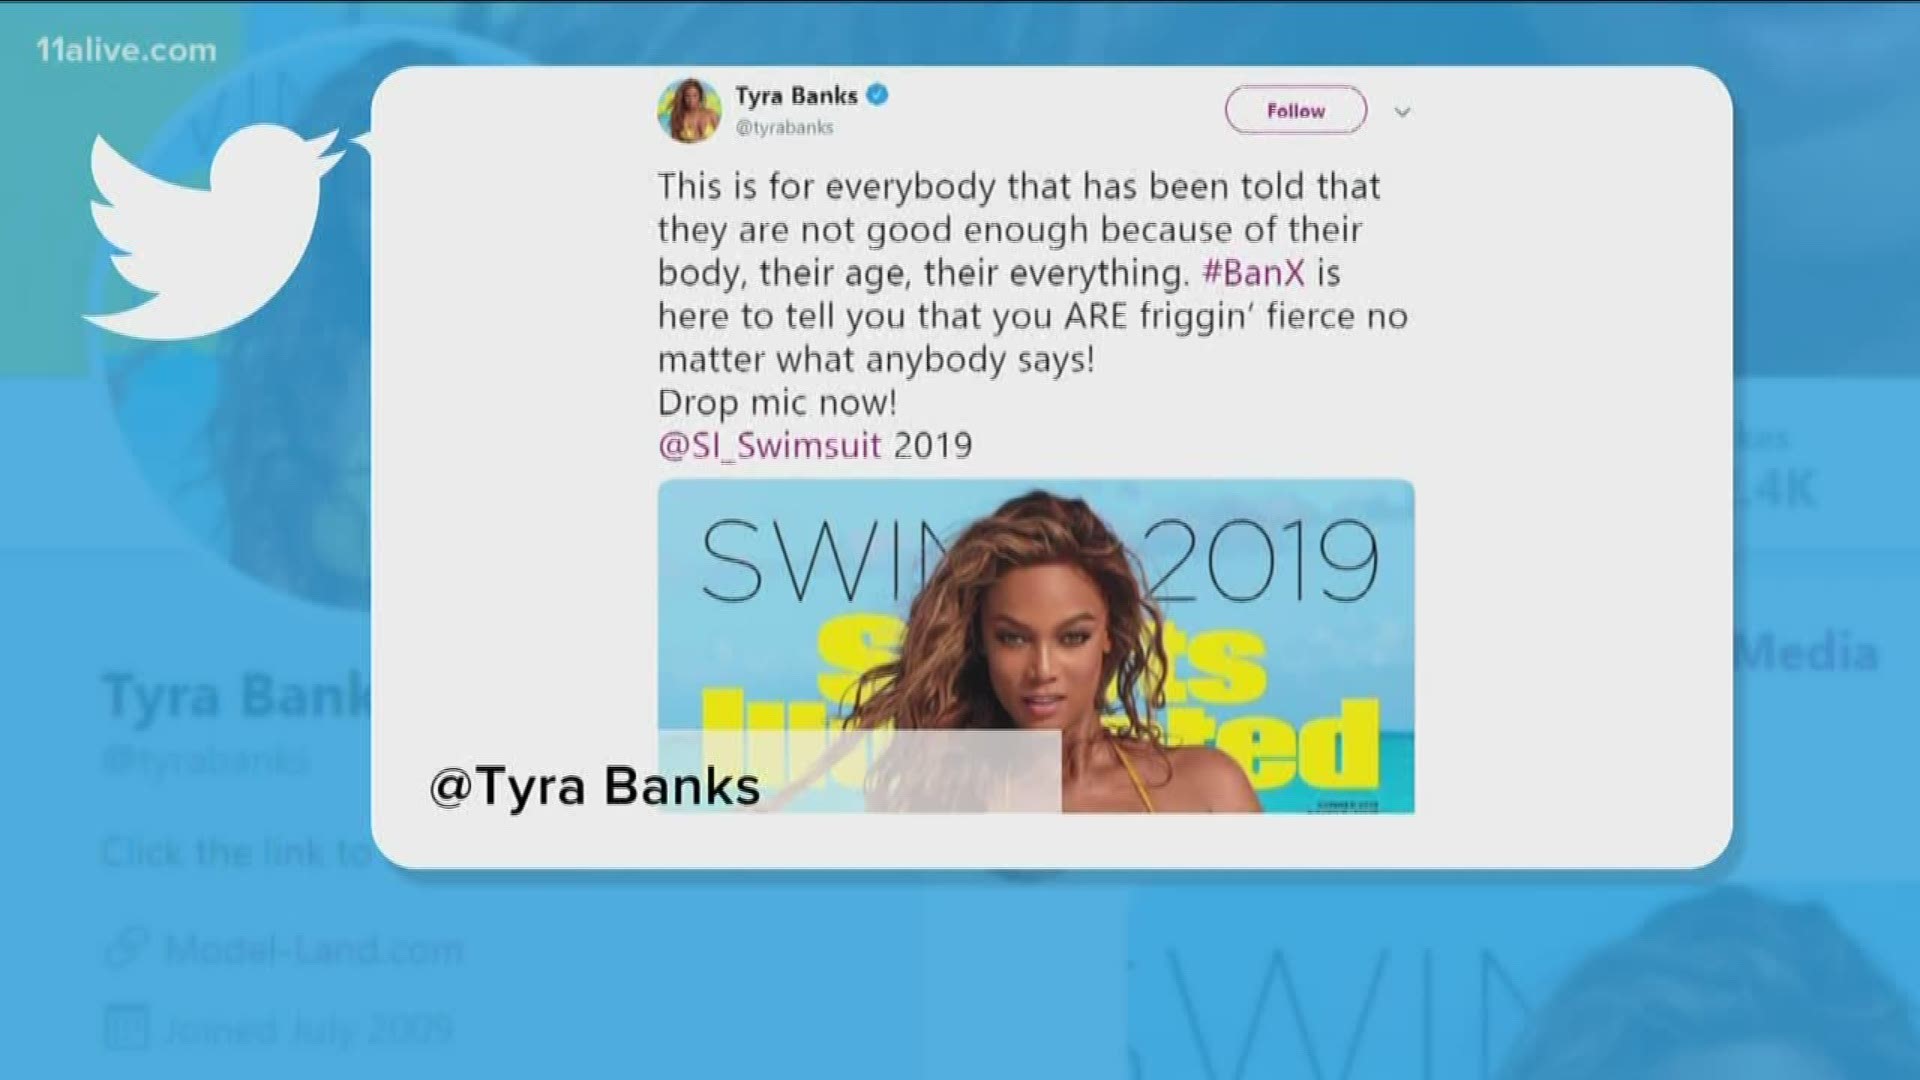 Tyra said this is for everyone that has been told that they are not good enough because of their body.